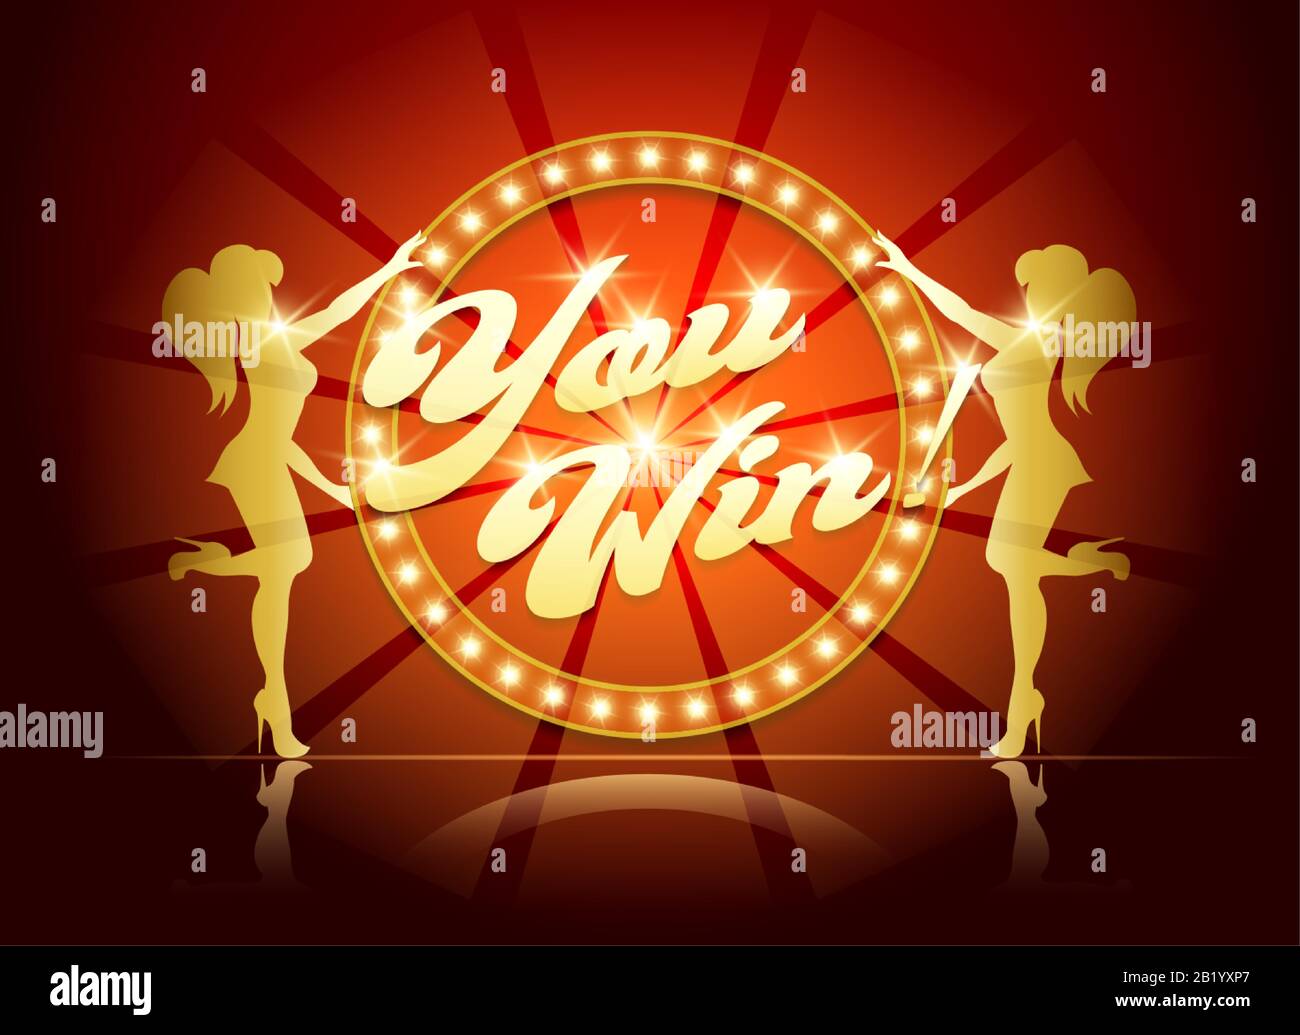 You Win Banner for Casino or Gaming industry in Retro Style. Wording You Win in circle light bulb frame and two girl silhouettes. Vector illustration. Stock Vector